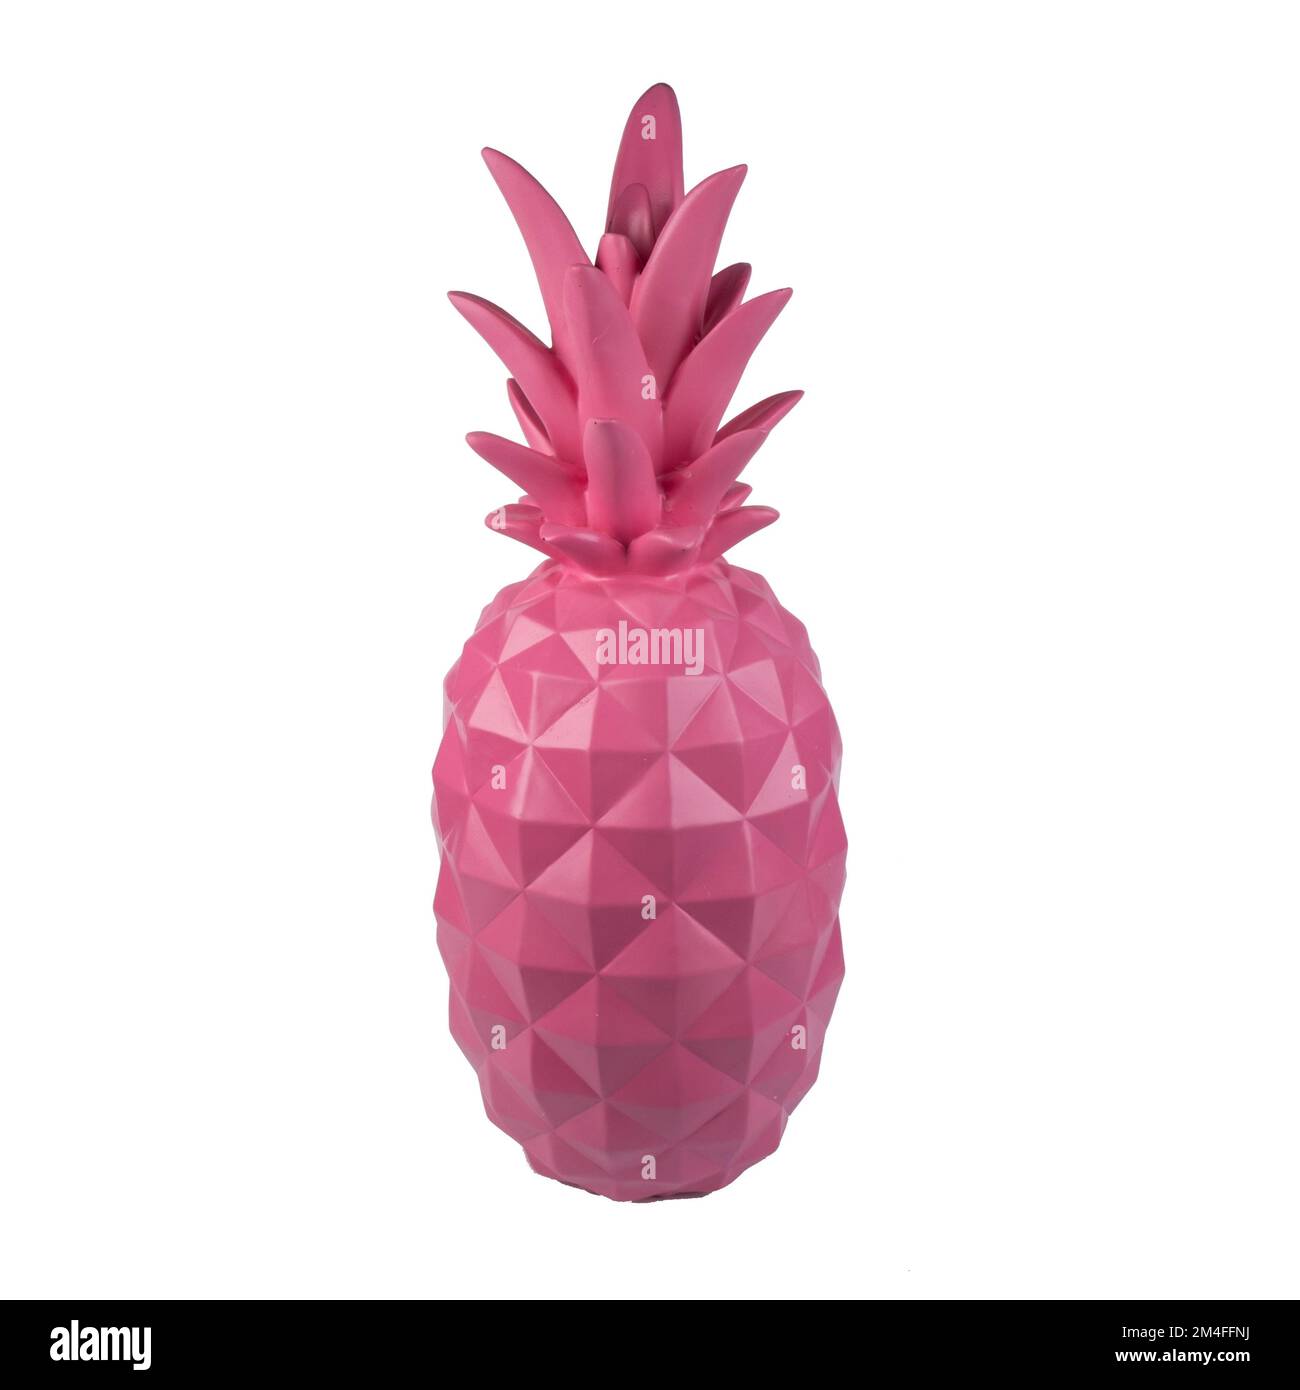 pink pineapple sculpture object for living room decoration isolated Stock Photo